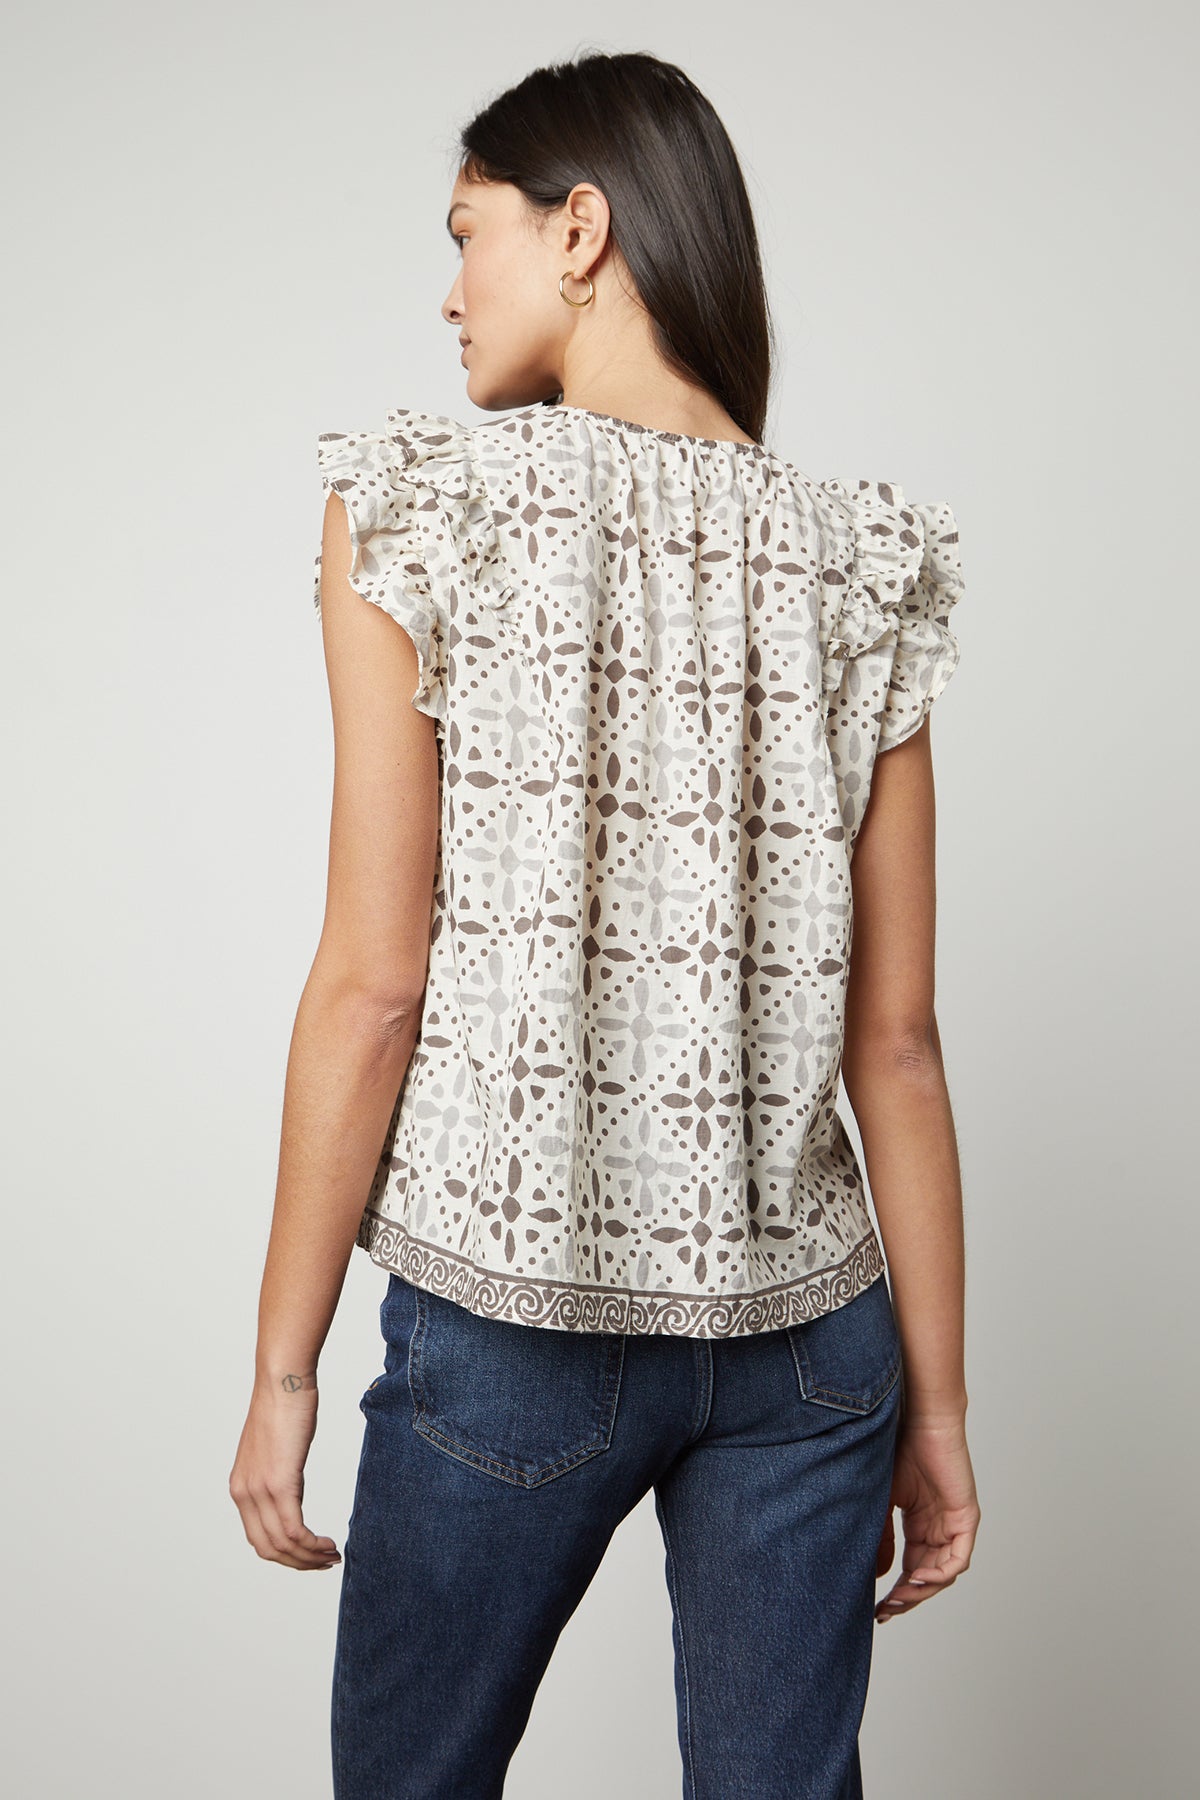 The back view of a woman wearing a CORIN PRINTED TANK TOP by Velvet by Graham & Spencer.-26727056244929